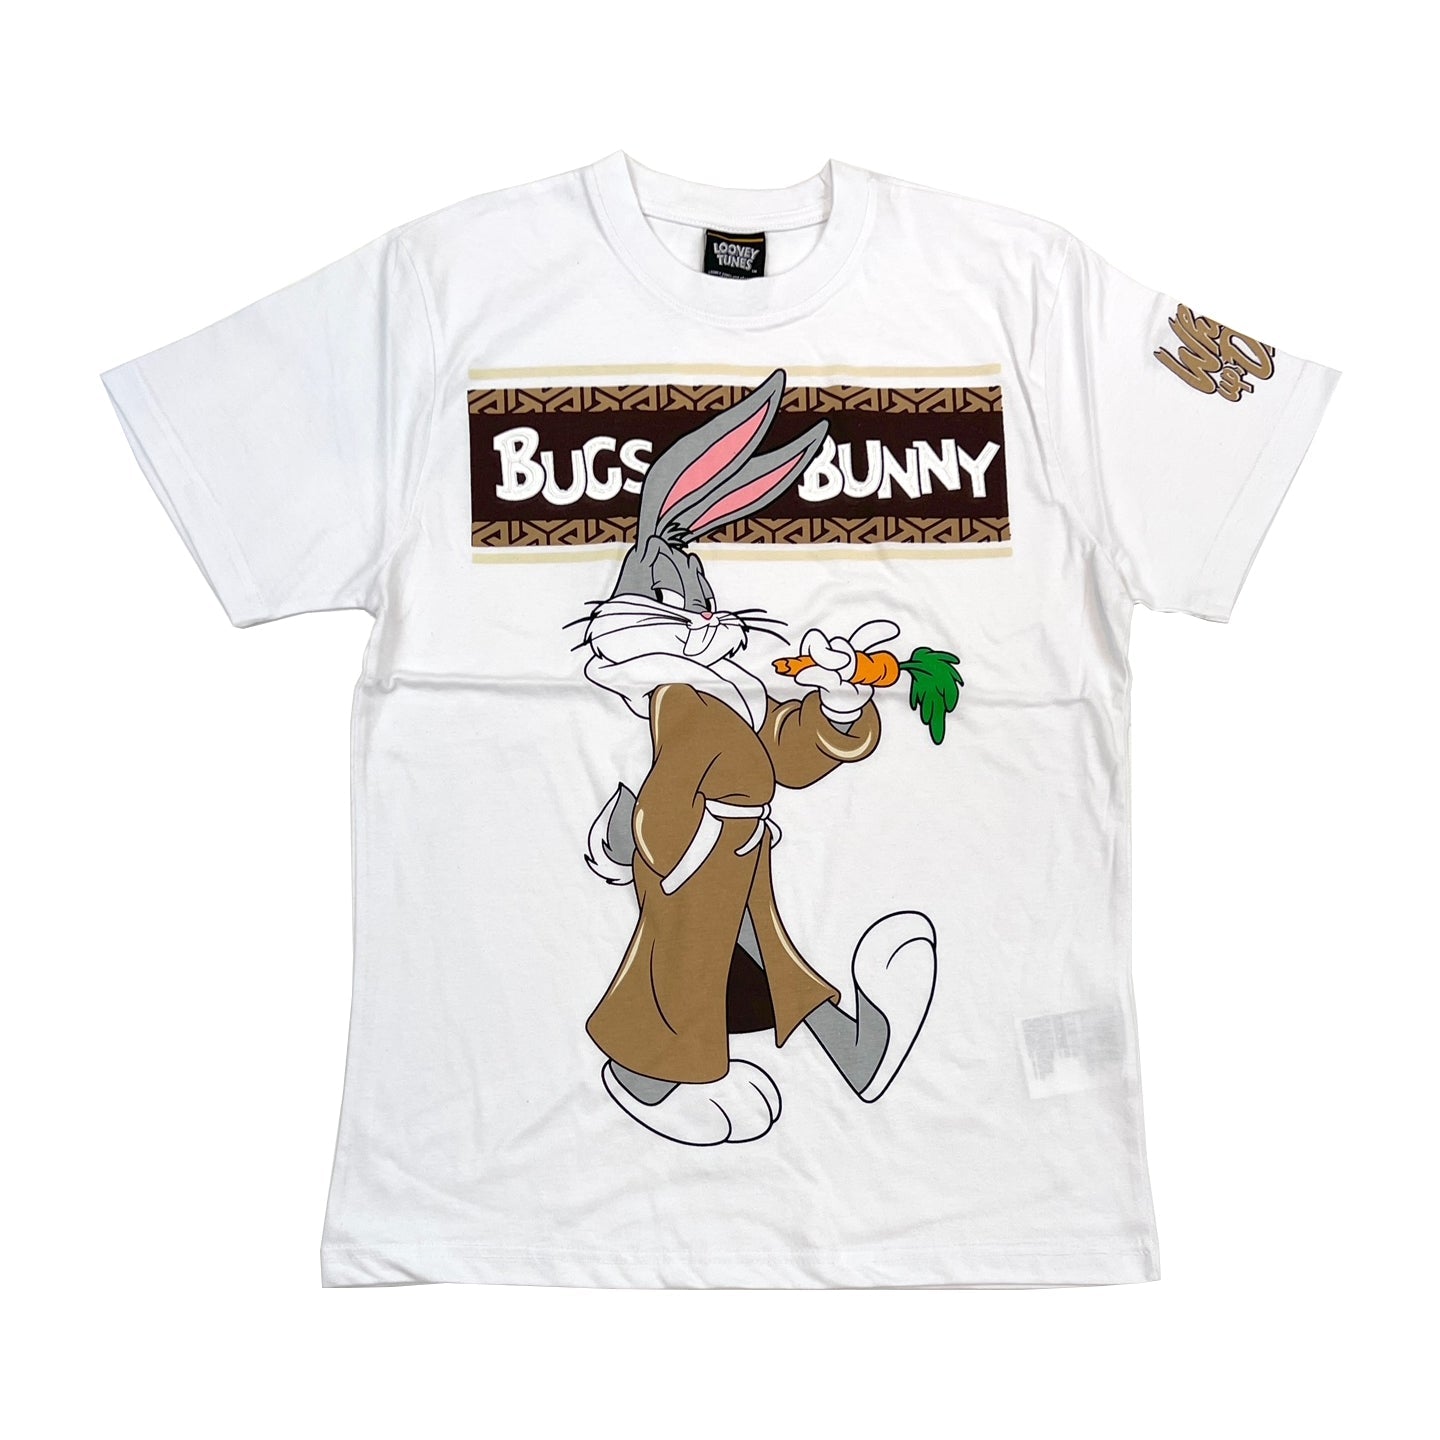 Tunes / (White) Tee Looney $30 Bugs $16.99 for 2 Bunny